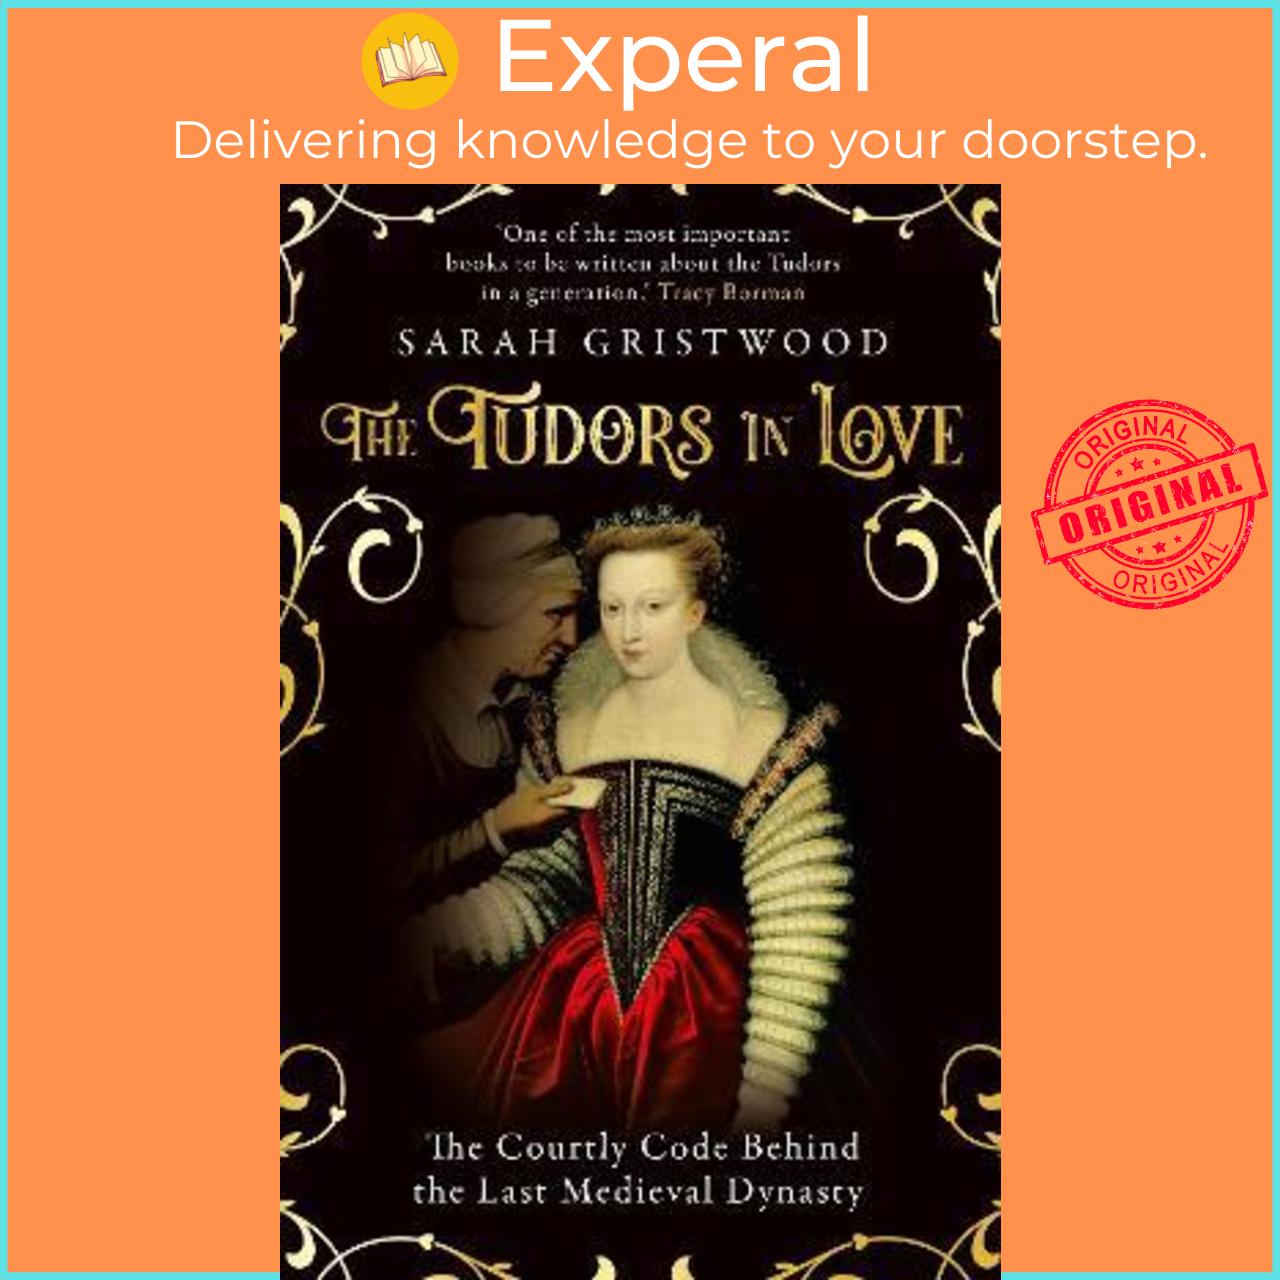 Sách - The Tudors in Love : The Courtly Code Behind the Last Medieval Dynasty by Sarah Gristwood (UK edition, paperback)